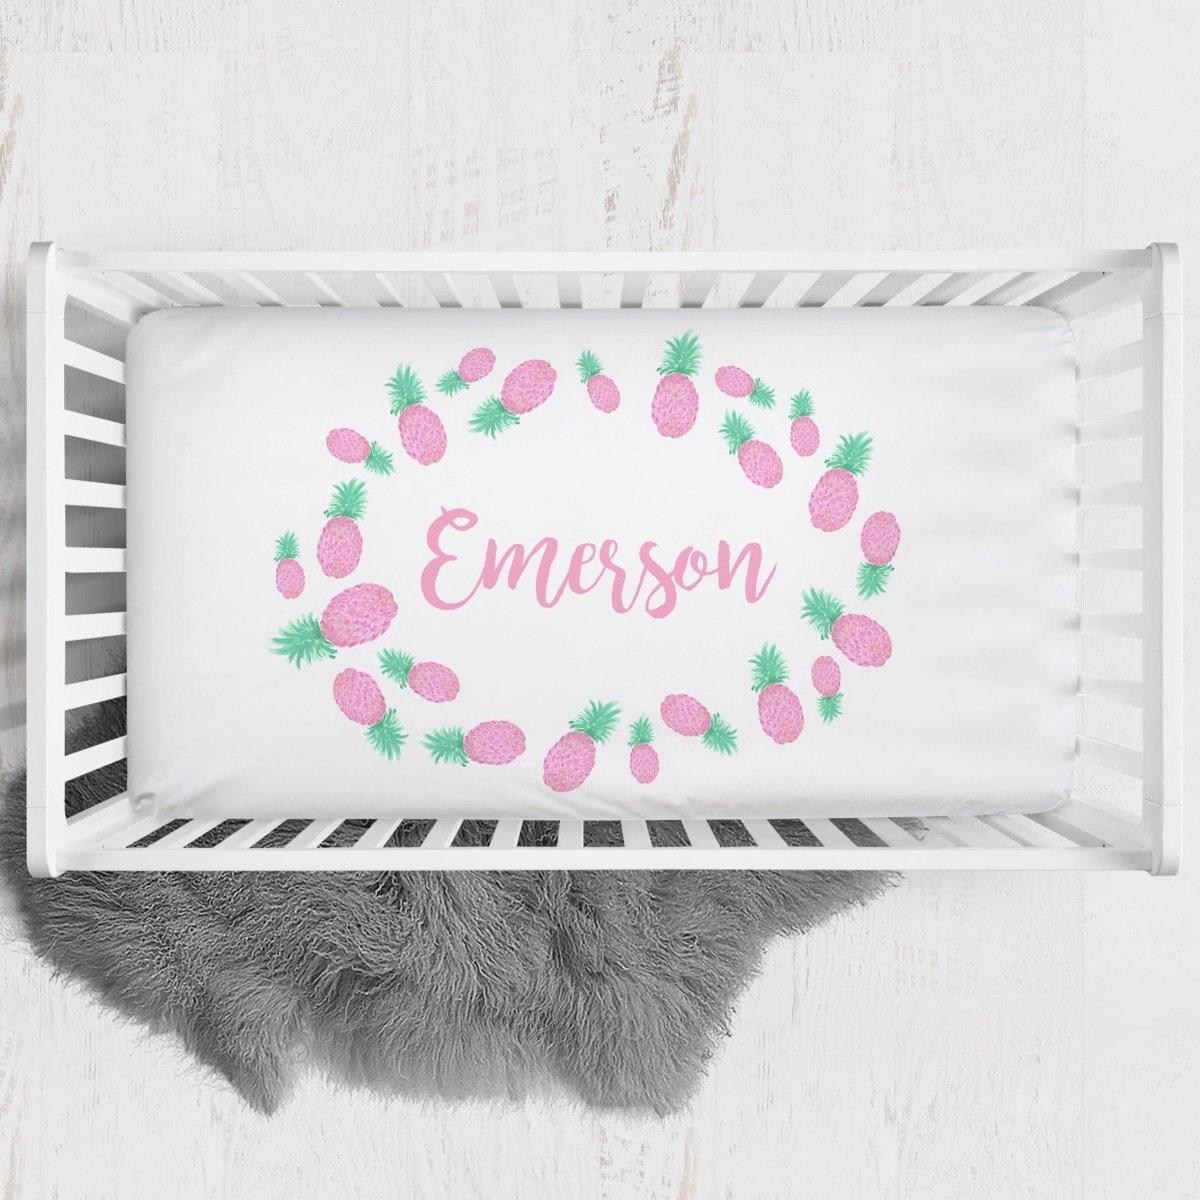 Pink Pineapple Personalized Crib Sheet - gender_girl, Personalized_Yes, text